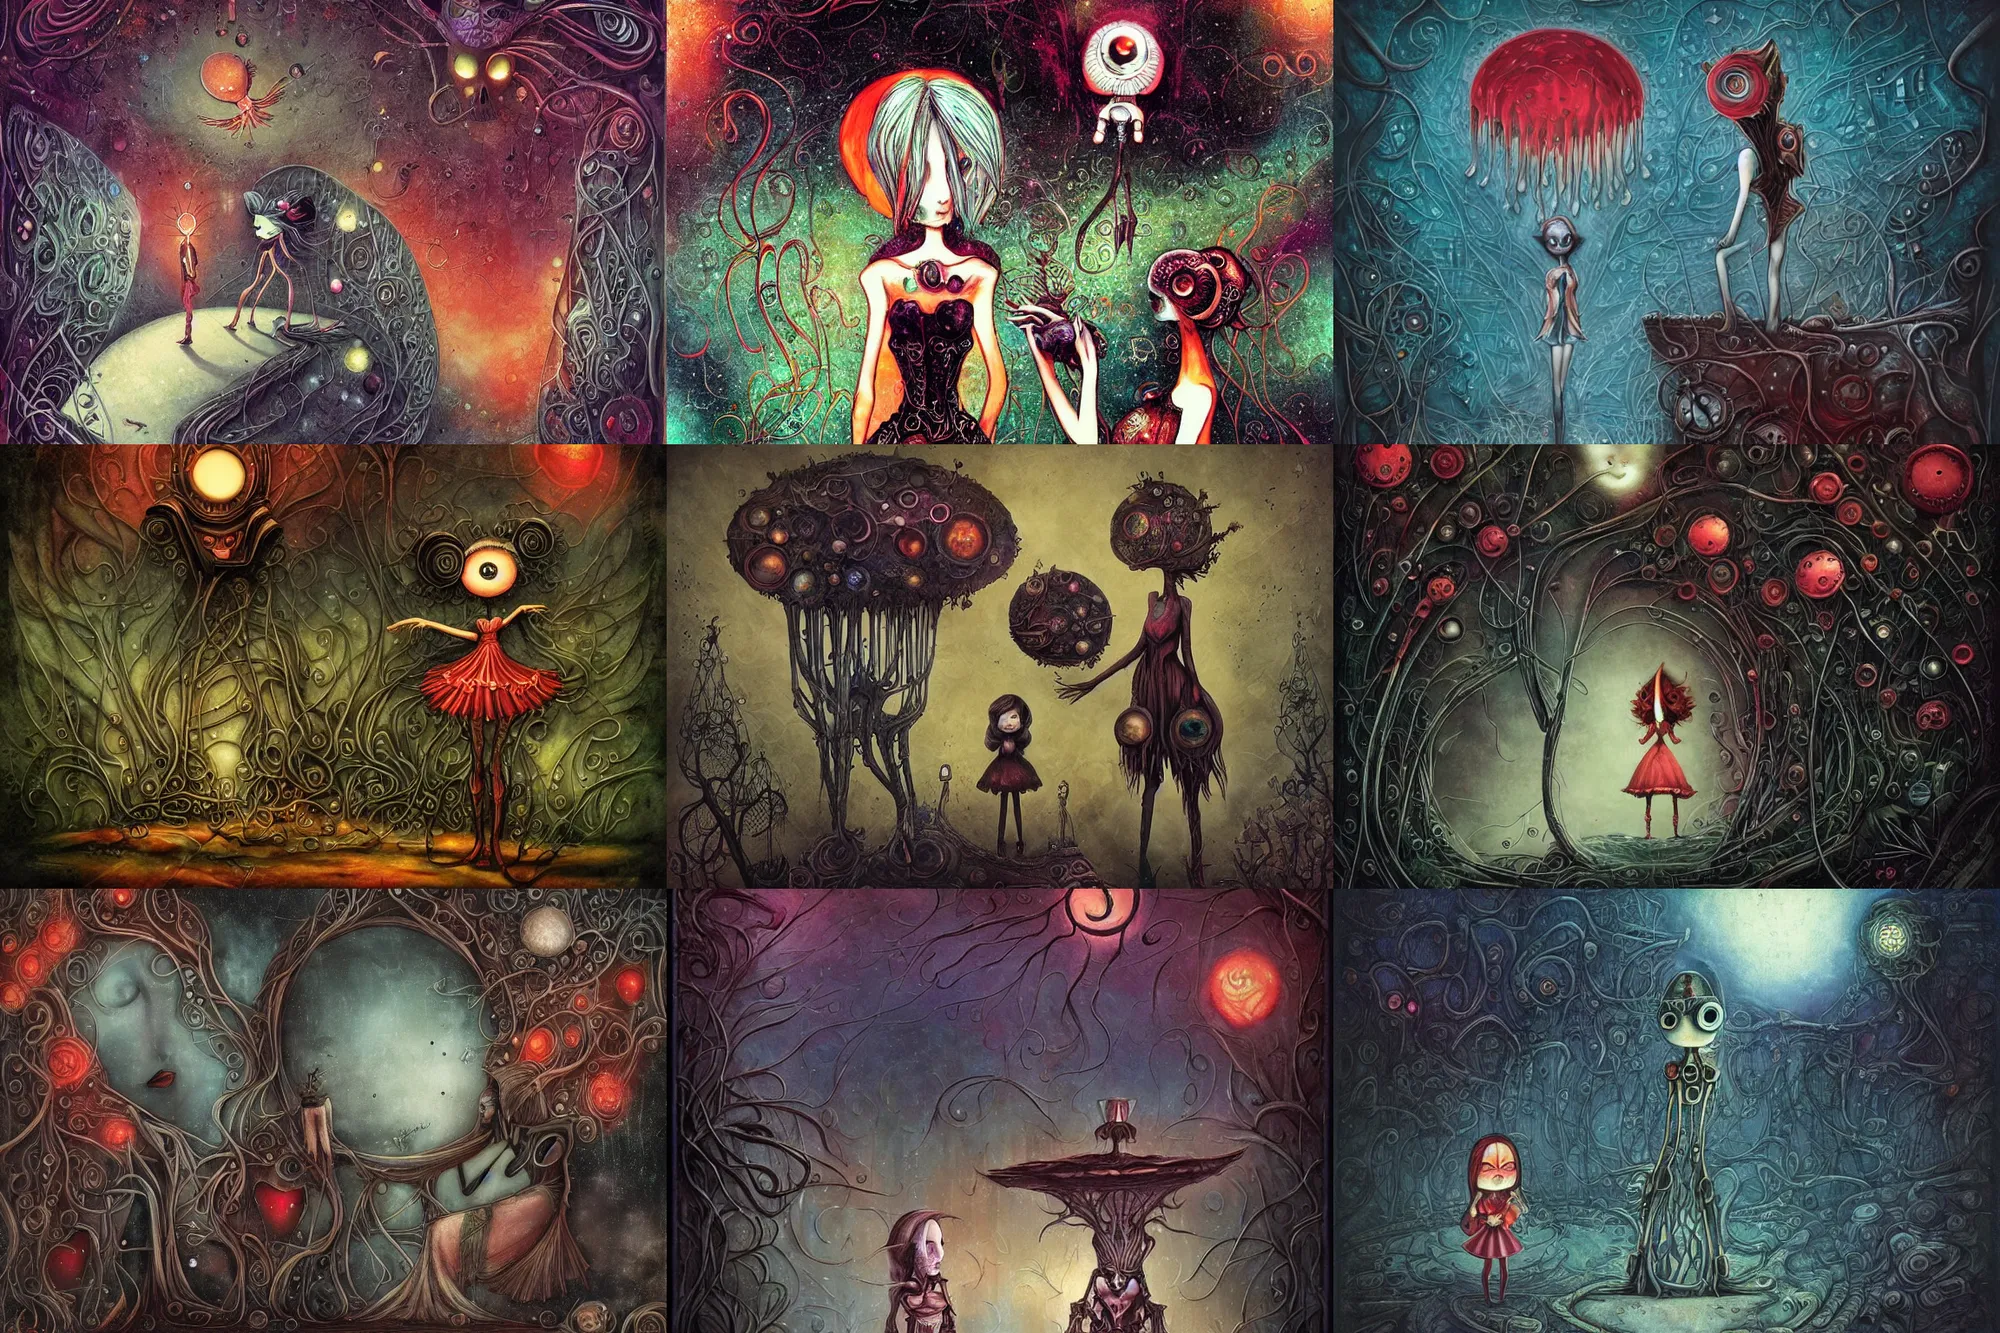 Prompt: Alice fails to get to the special garden, biomechanoid, sci-fi, dramatic, art style Megan Duncanson and Benjamin Lacombe, super details, dark dull colors, ornate background, mysterious, eerie, sinister